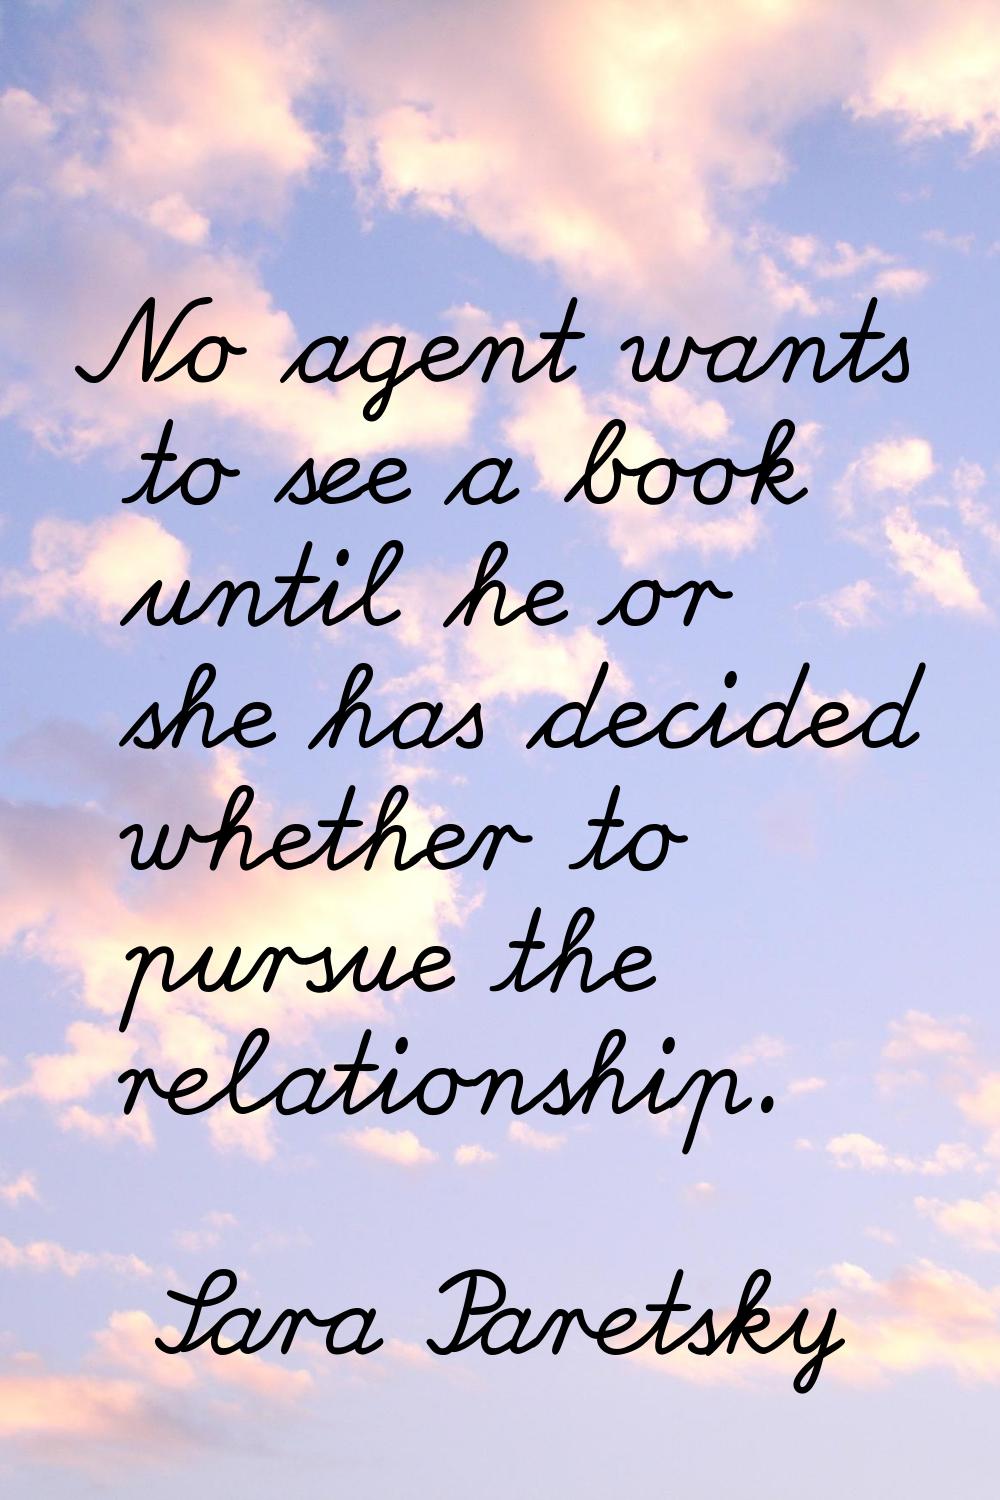 No agent wants to see a book until he or she has decided whether to pursue the relationship.